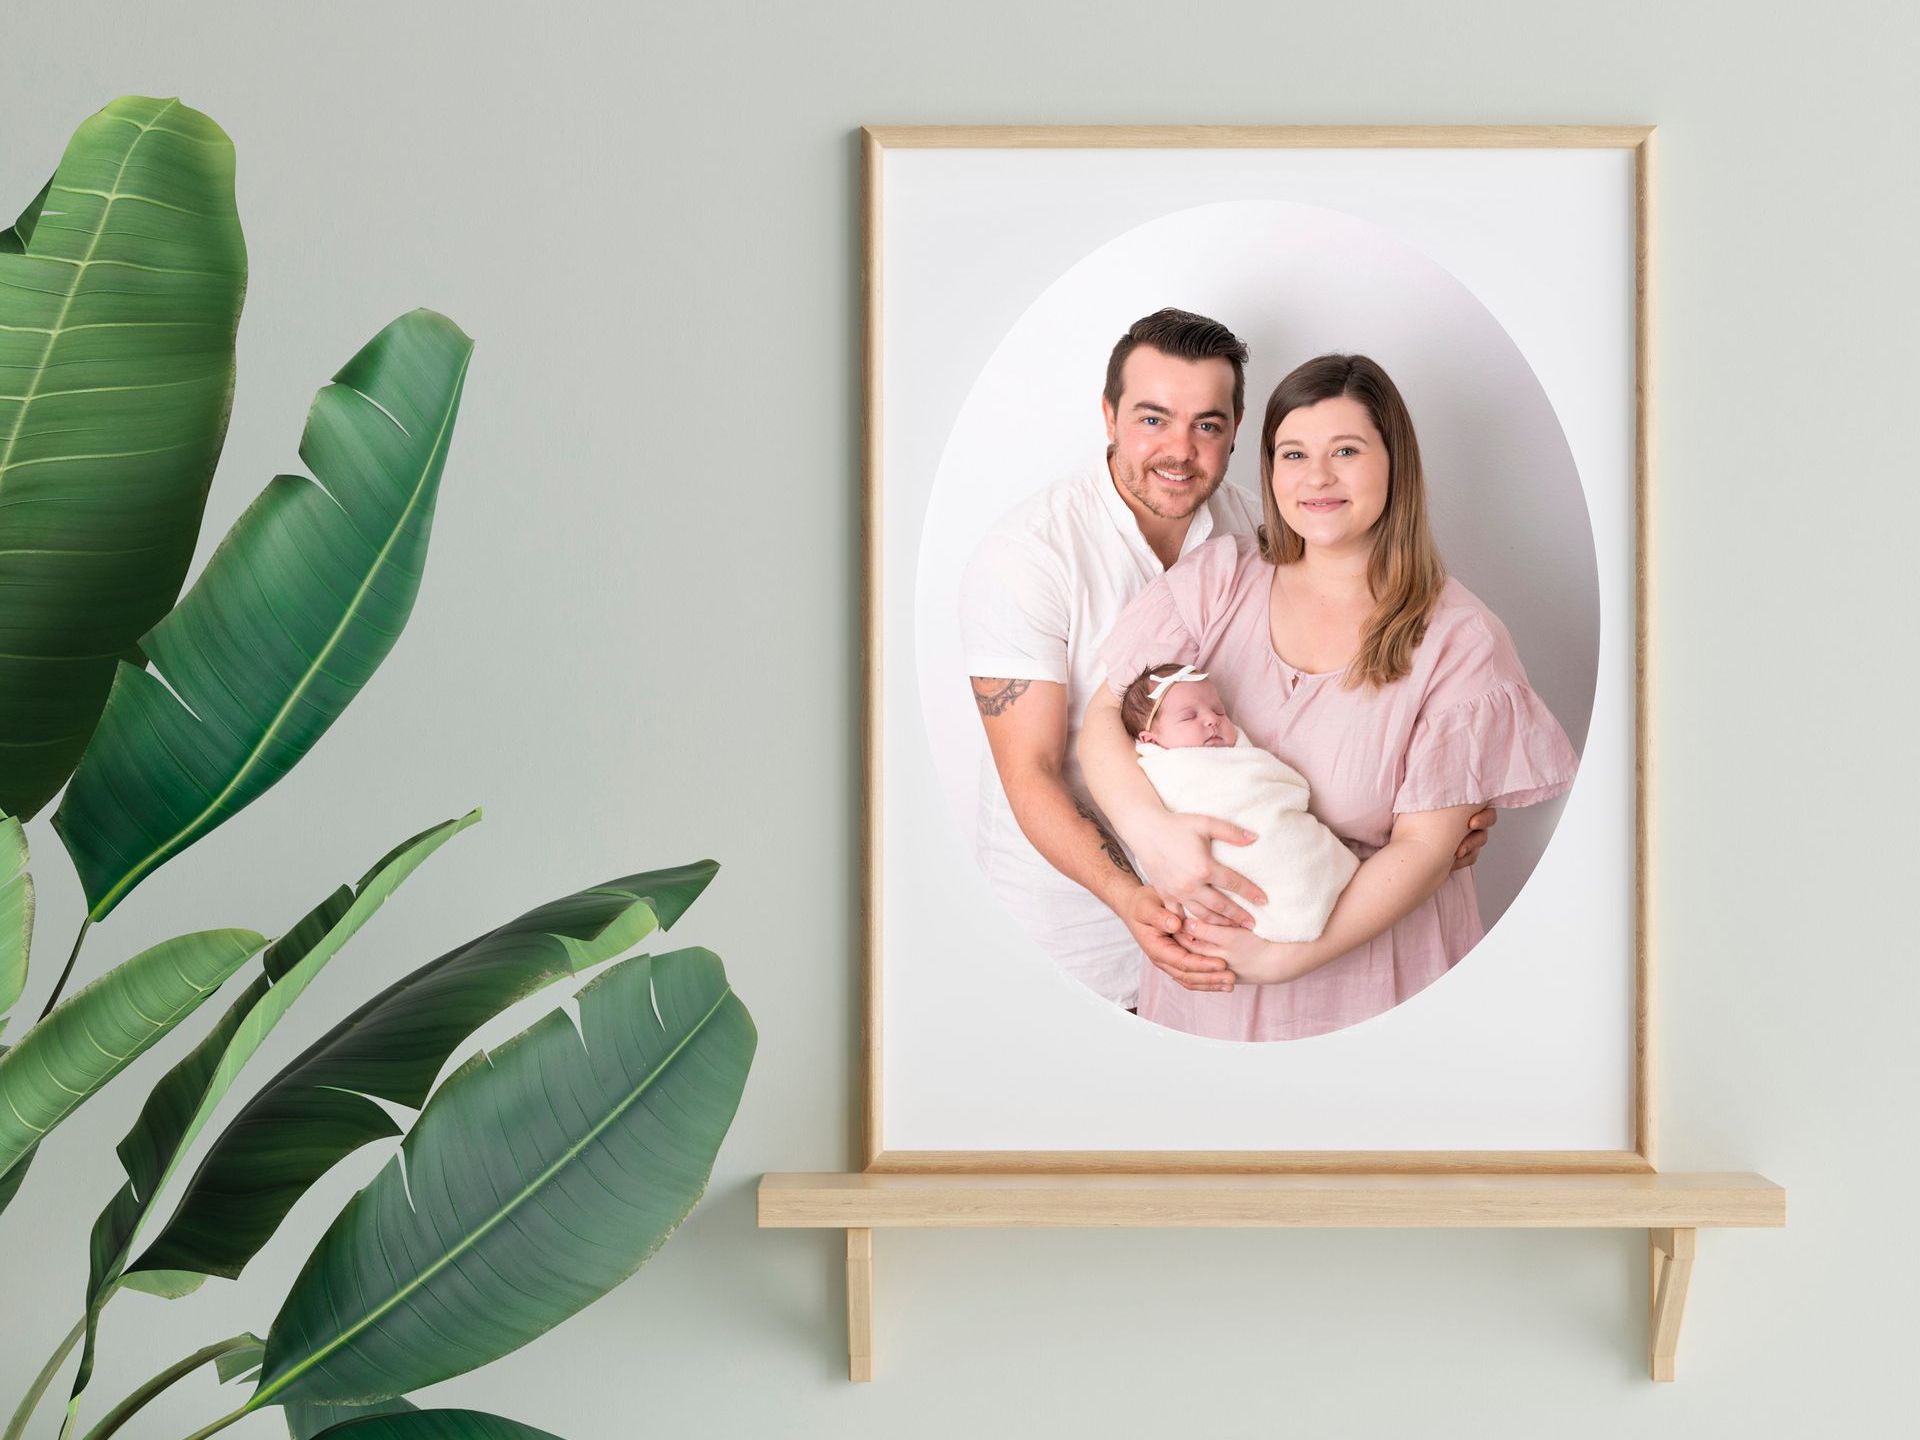 Framed portrait of a young couple holding their baby girl